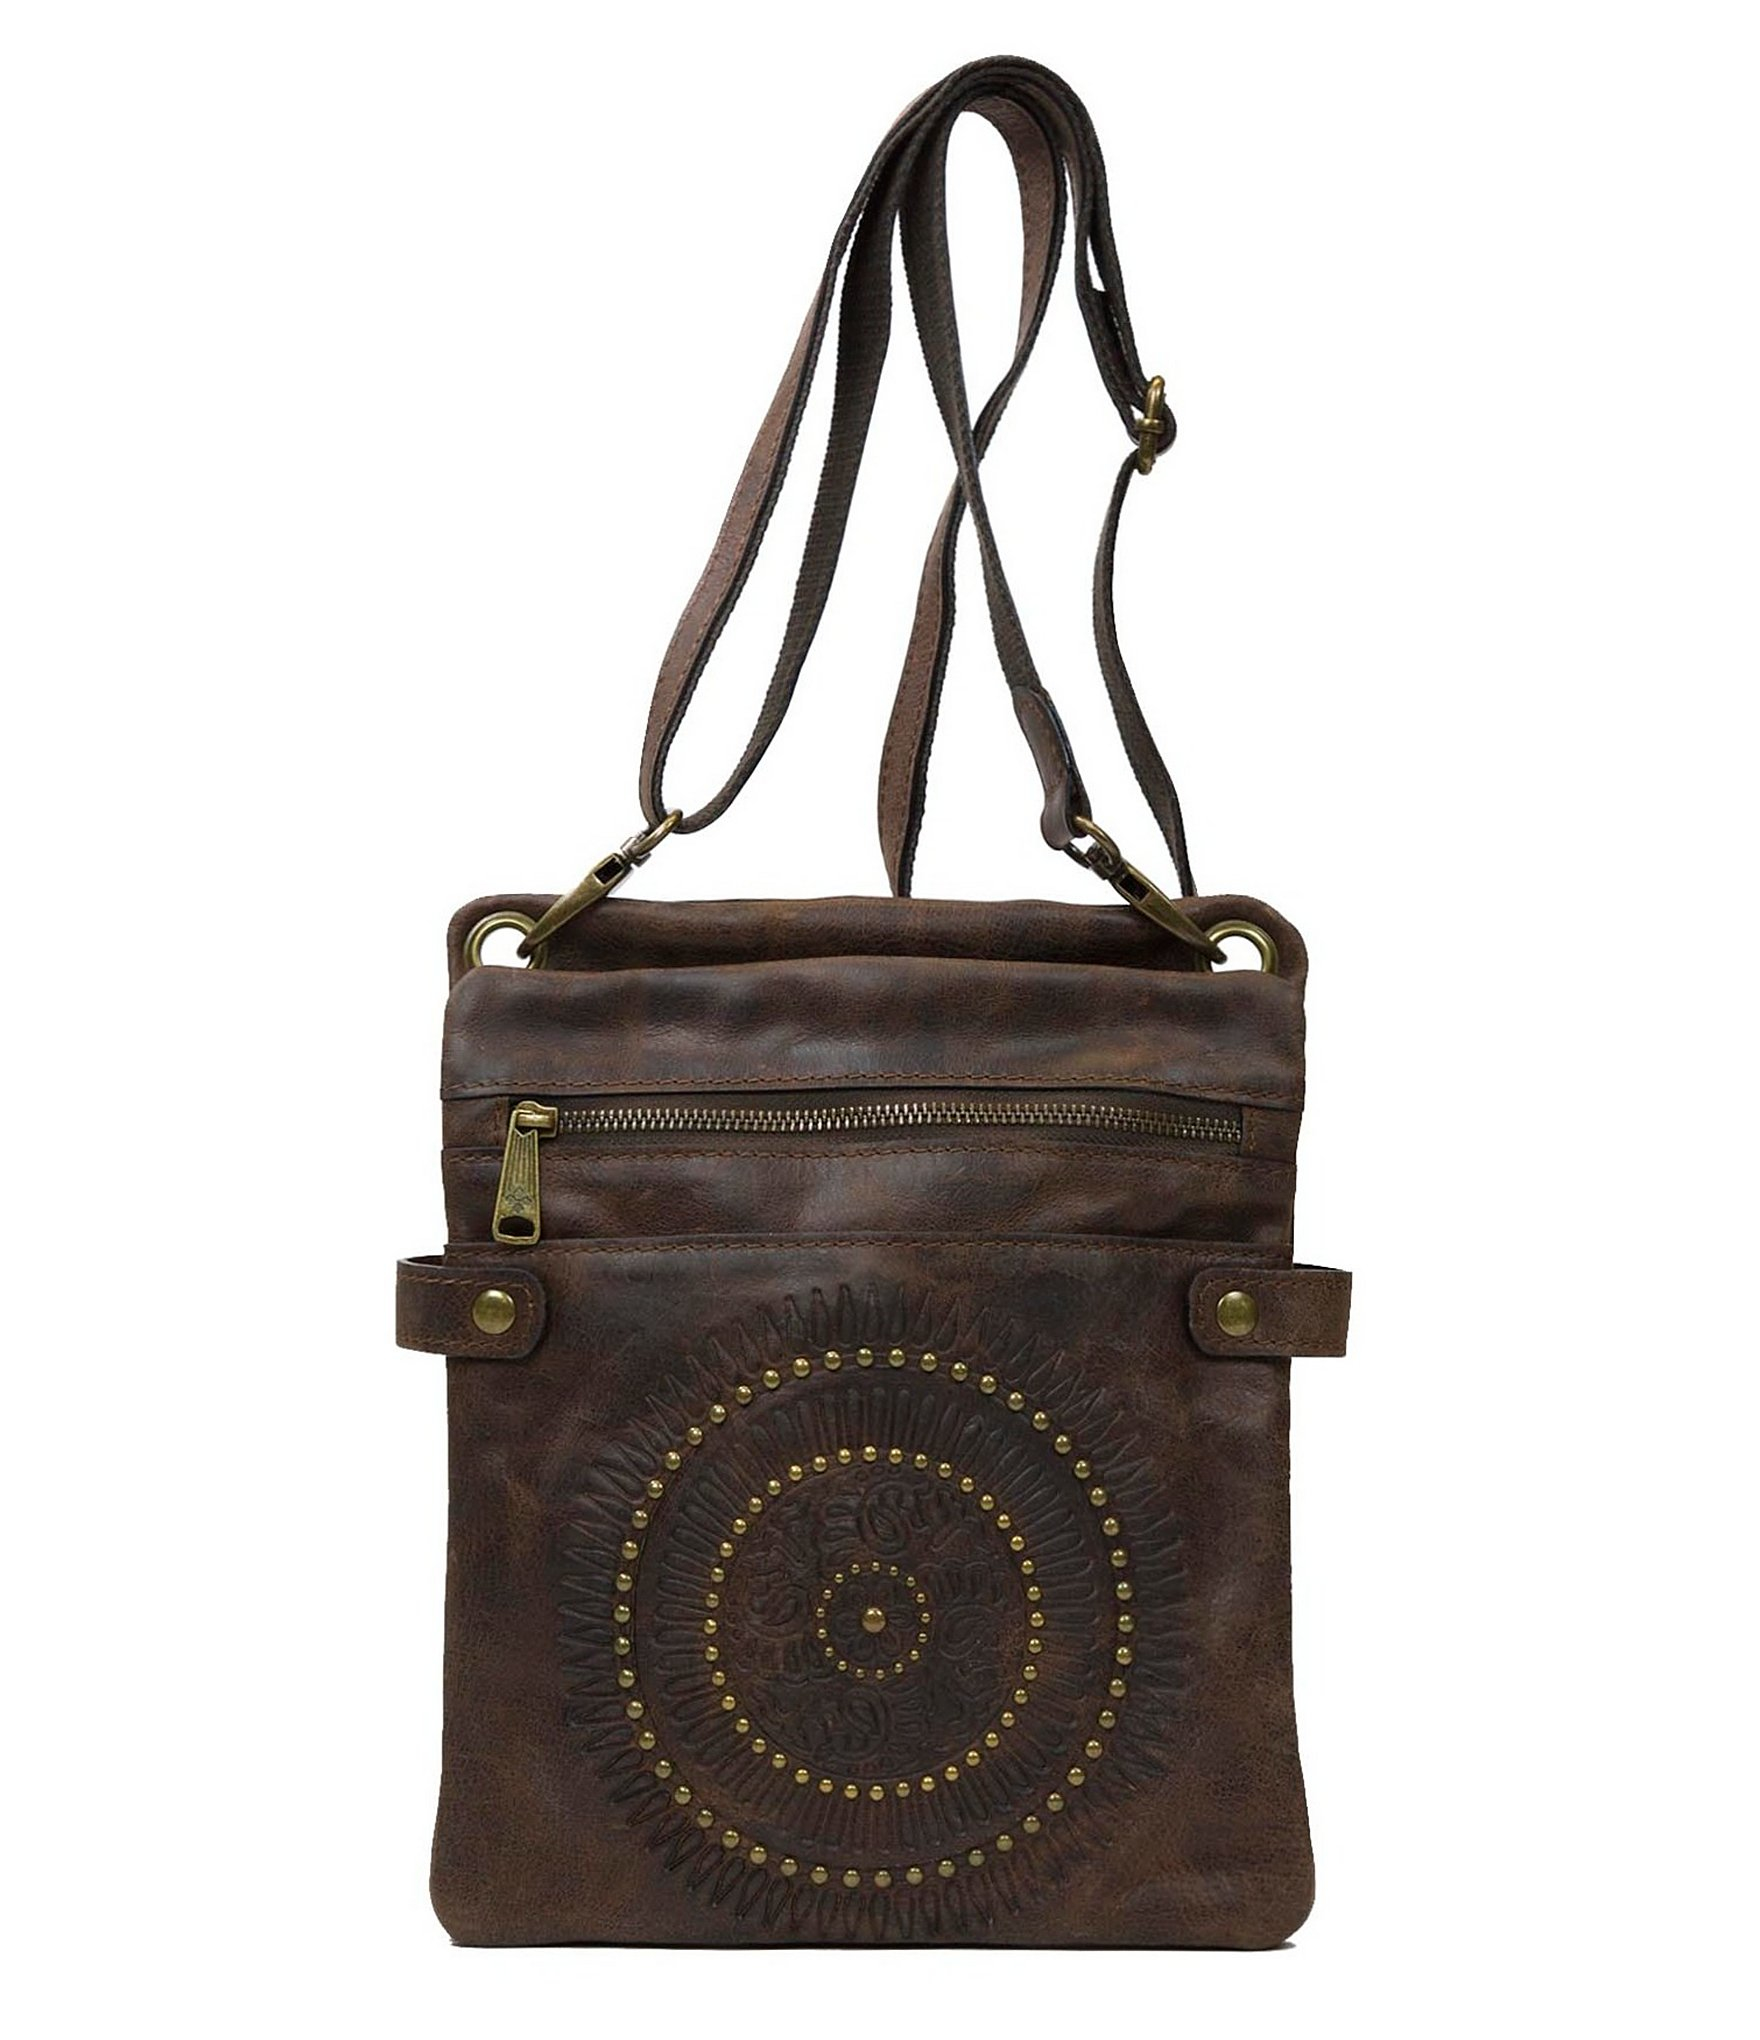 Patricia nash Distressed Vintage Collection Francesca Sling Cross-body Bag in Brown | Lyst